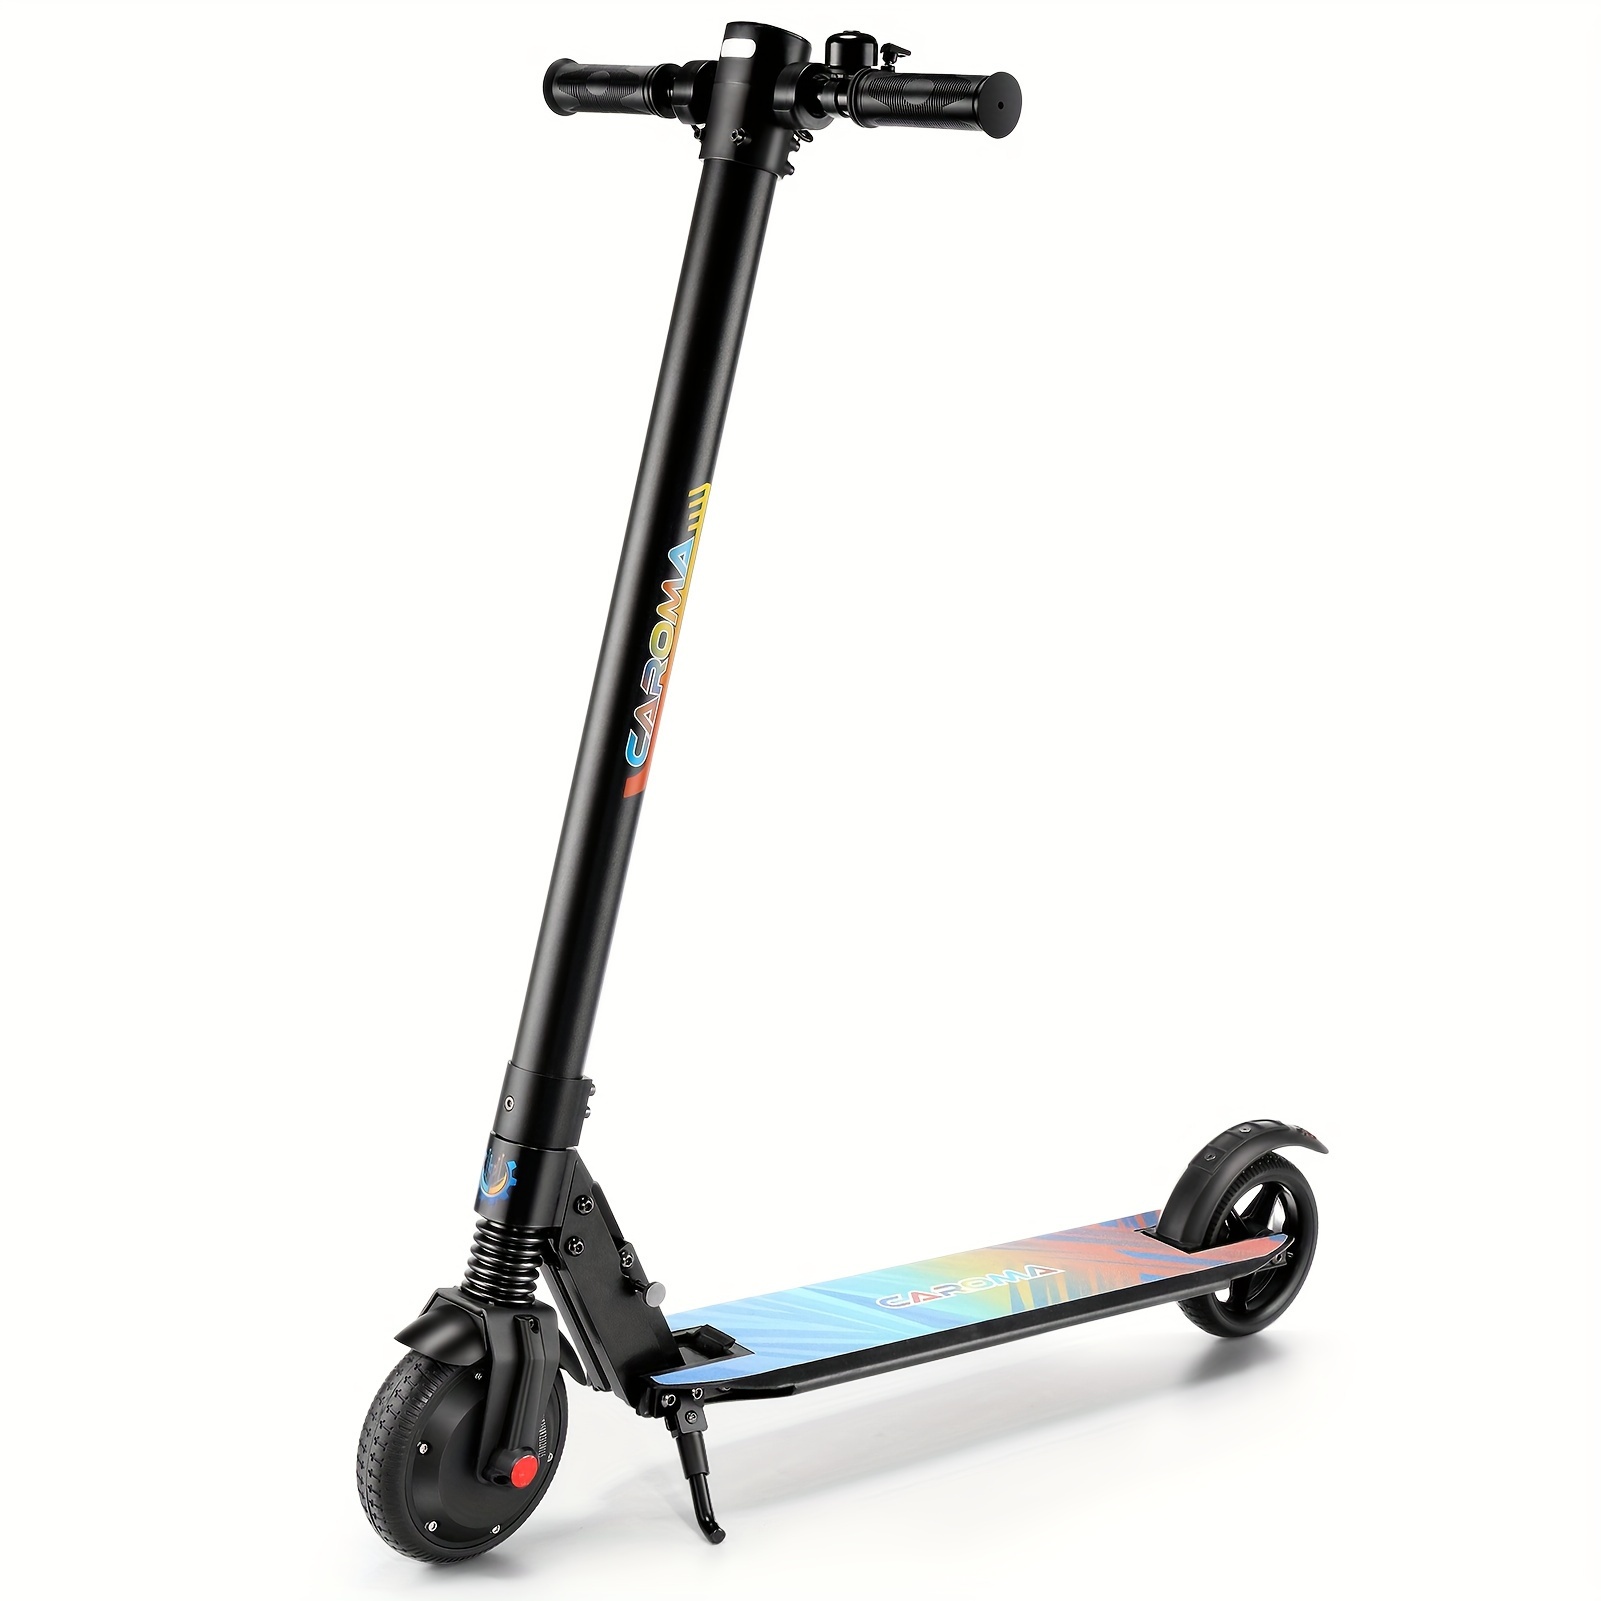 

Caroma 250w Foldable Electric Scooter For Adults, 15.5 Miles Range, 15.5 Mph Top Speed, 220 Lbs Maximum Load, Safe Electronic Braking System, Portable Foldable Commuter Electric Scooter